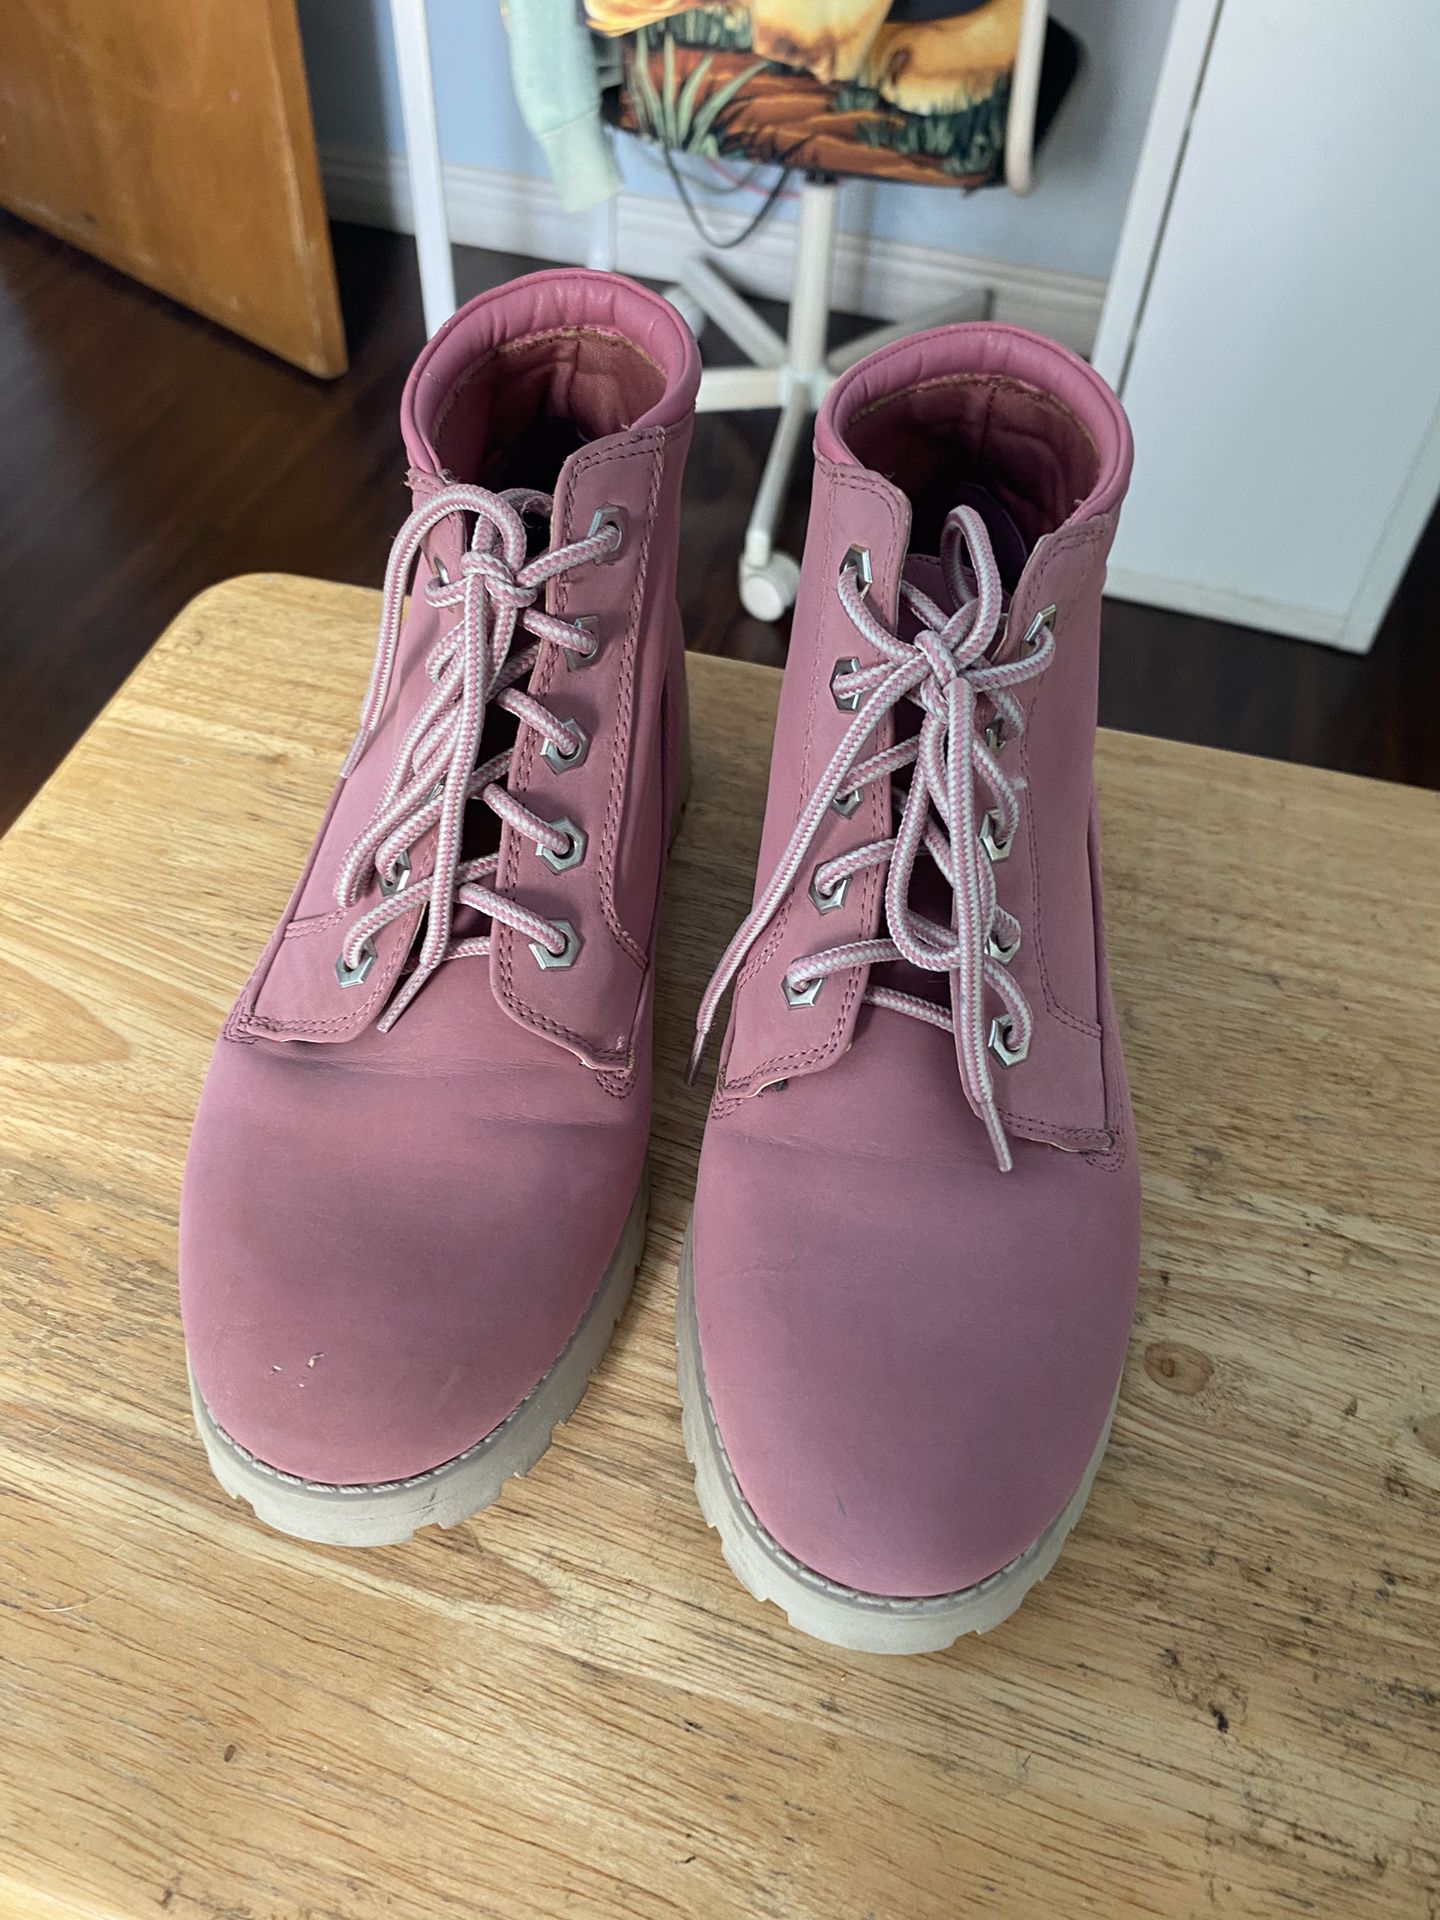 Pink Cliff boots by White Mountain